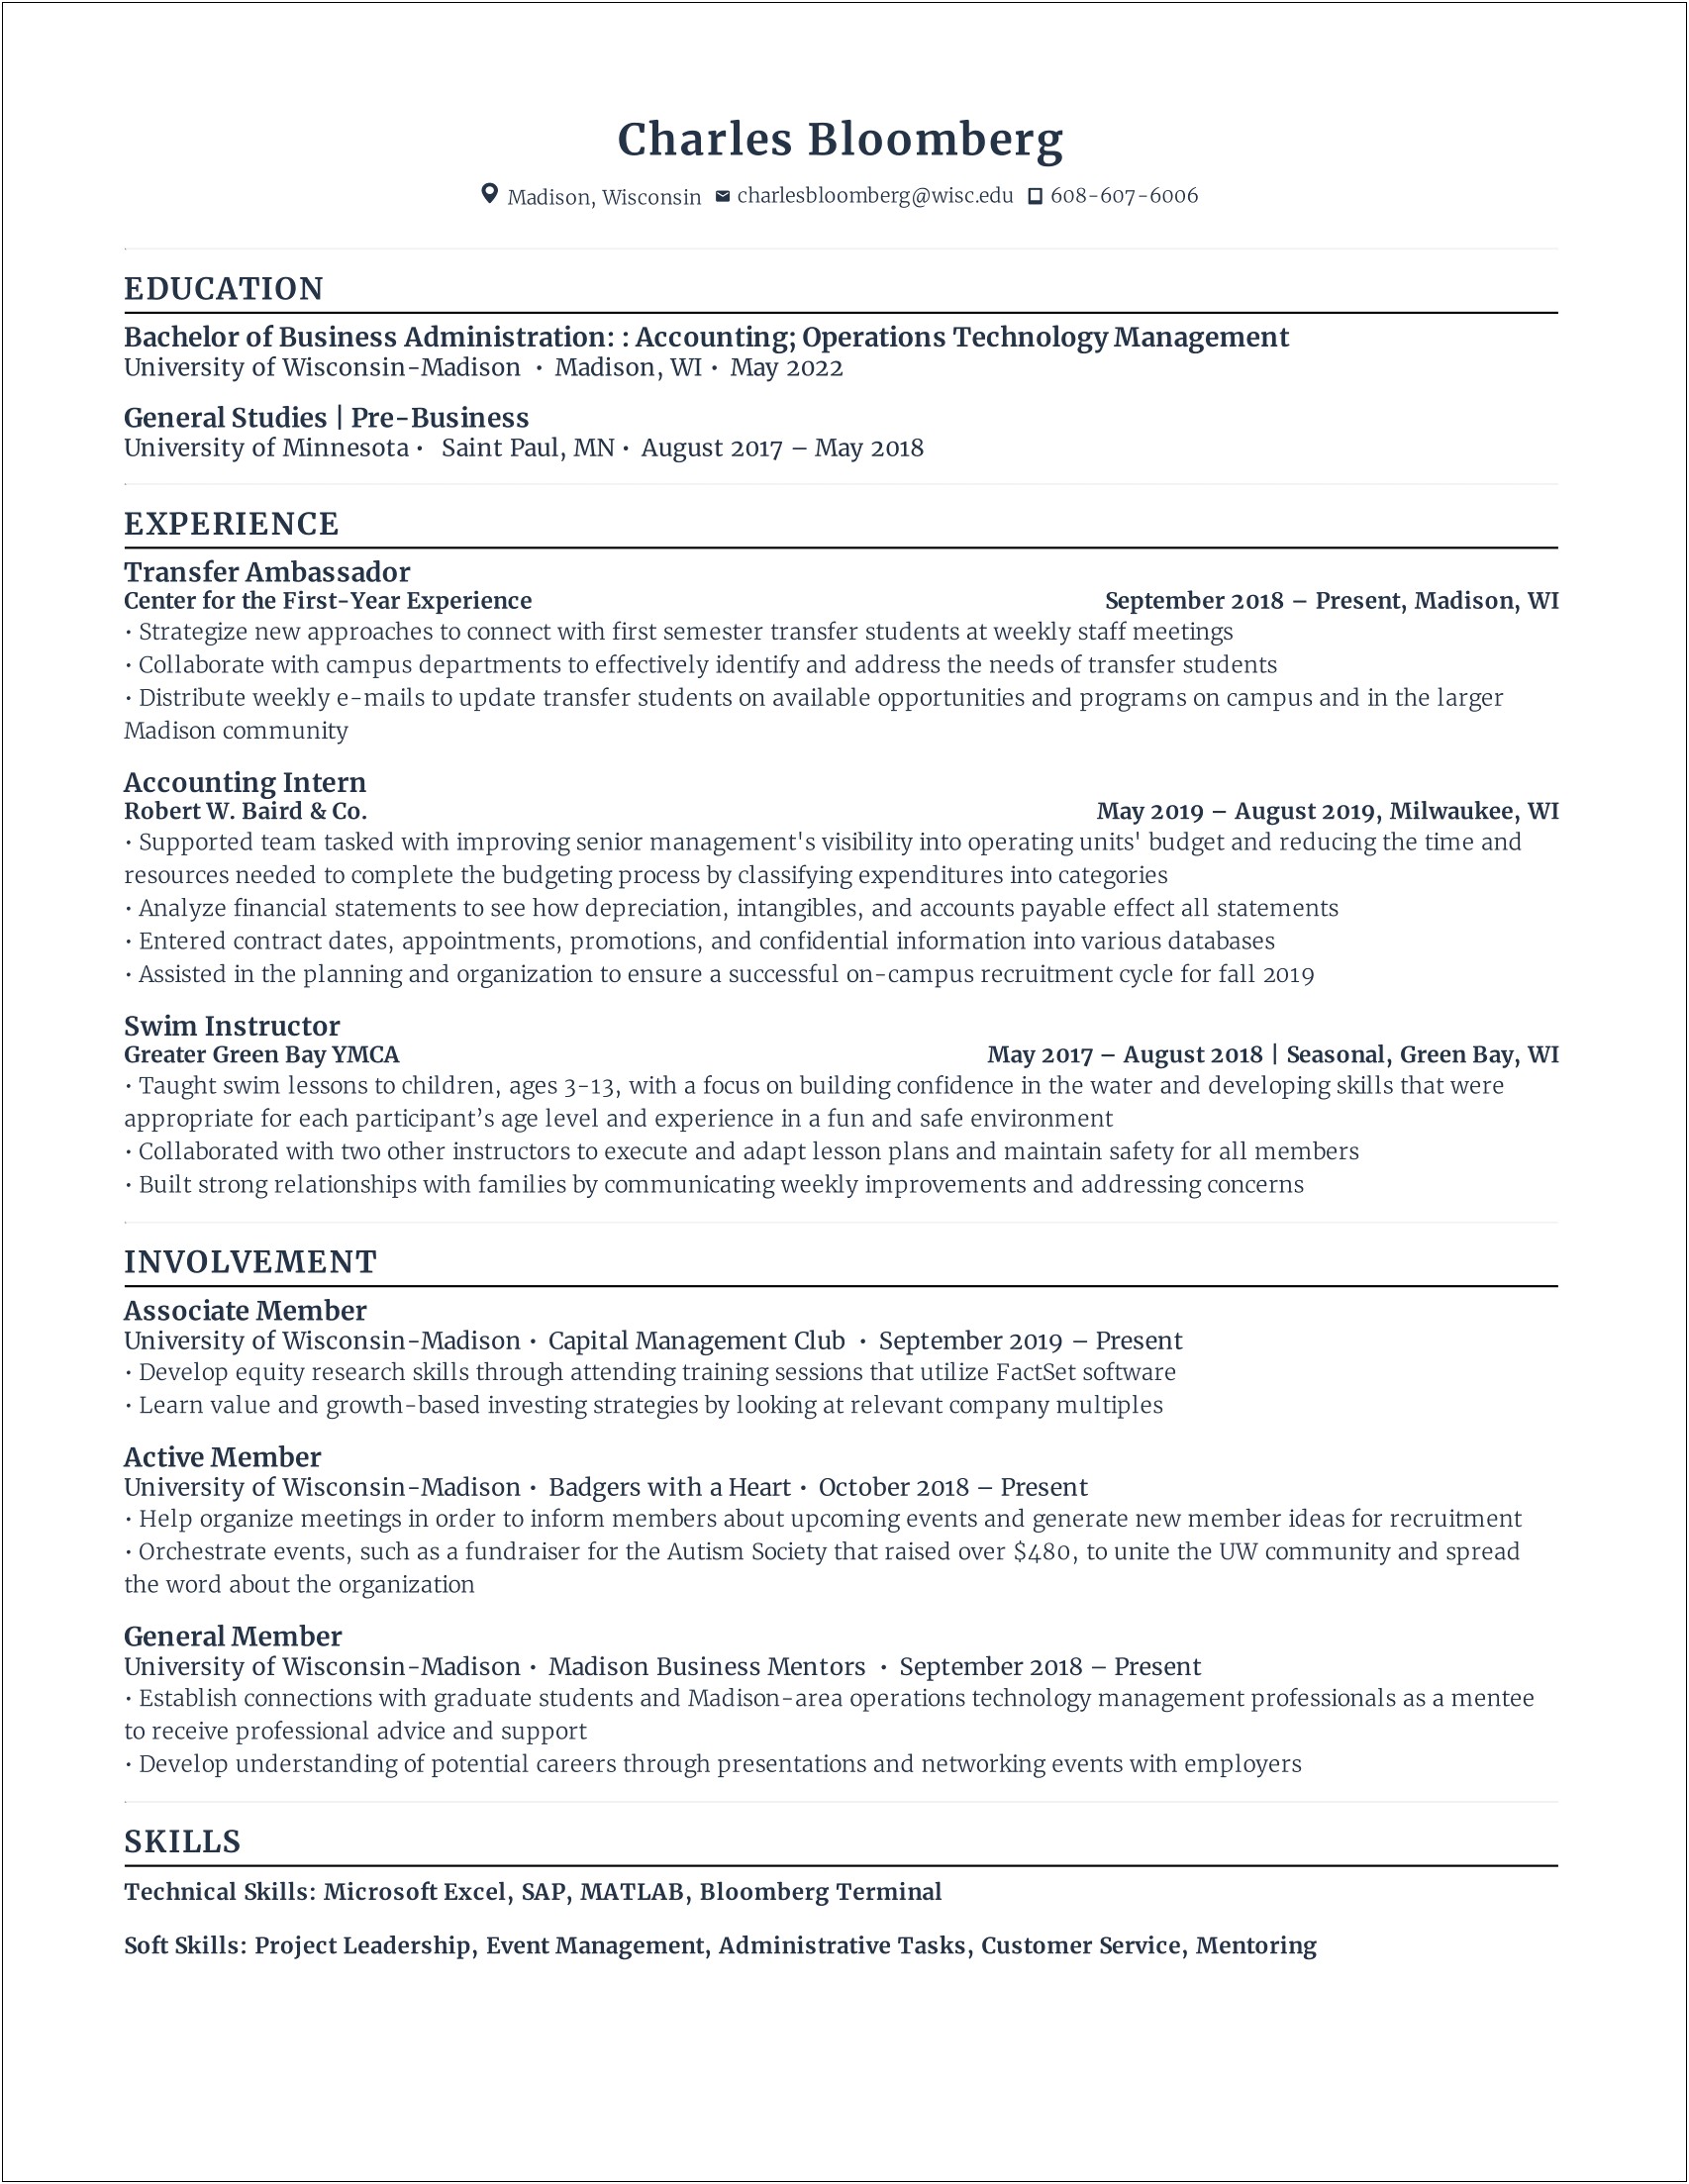 Leadership Experience On A Business School Resume